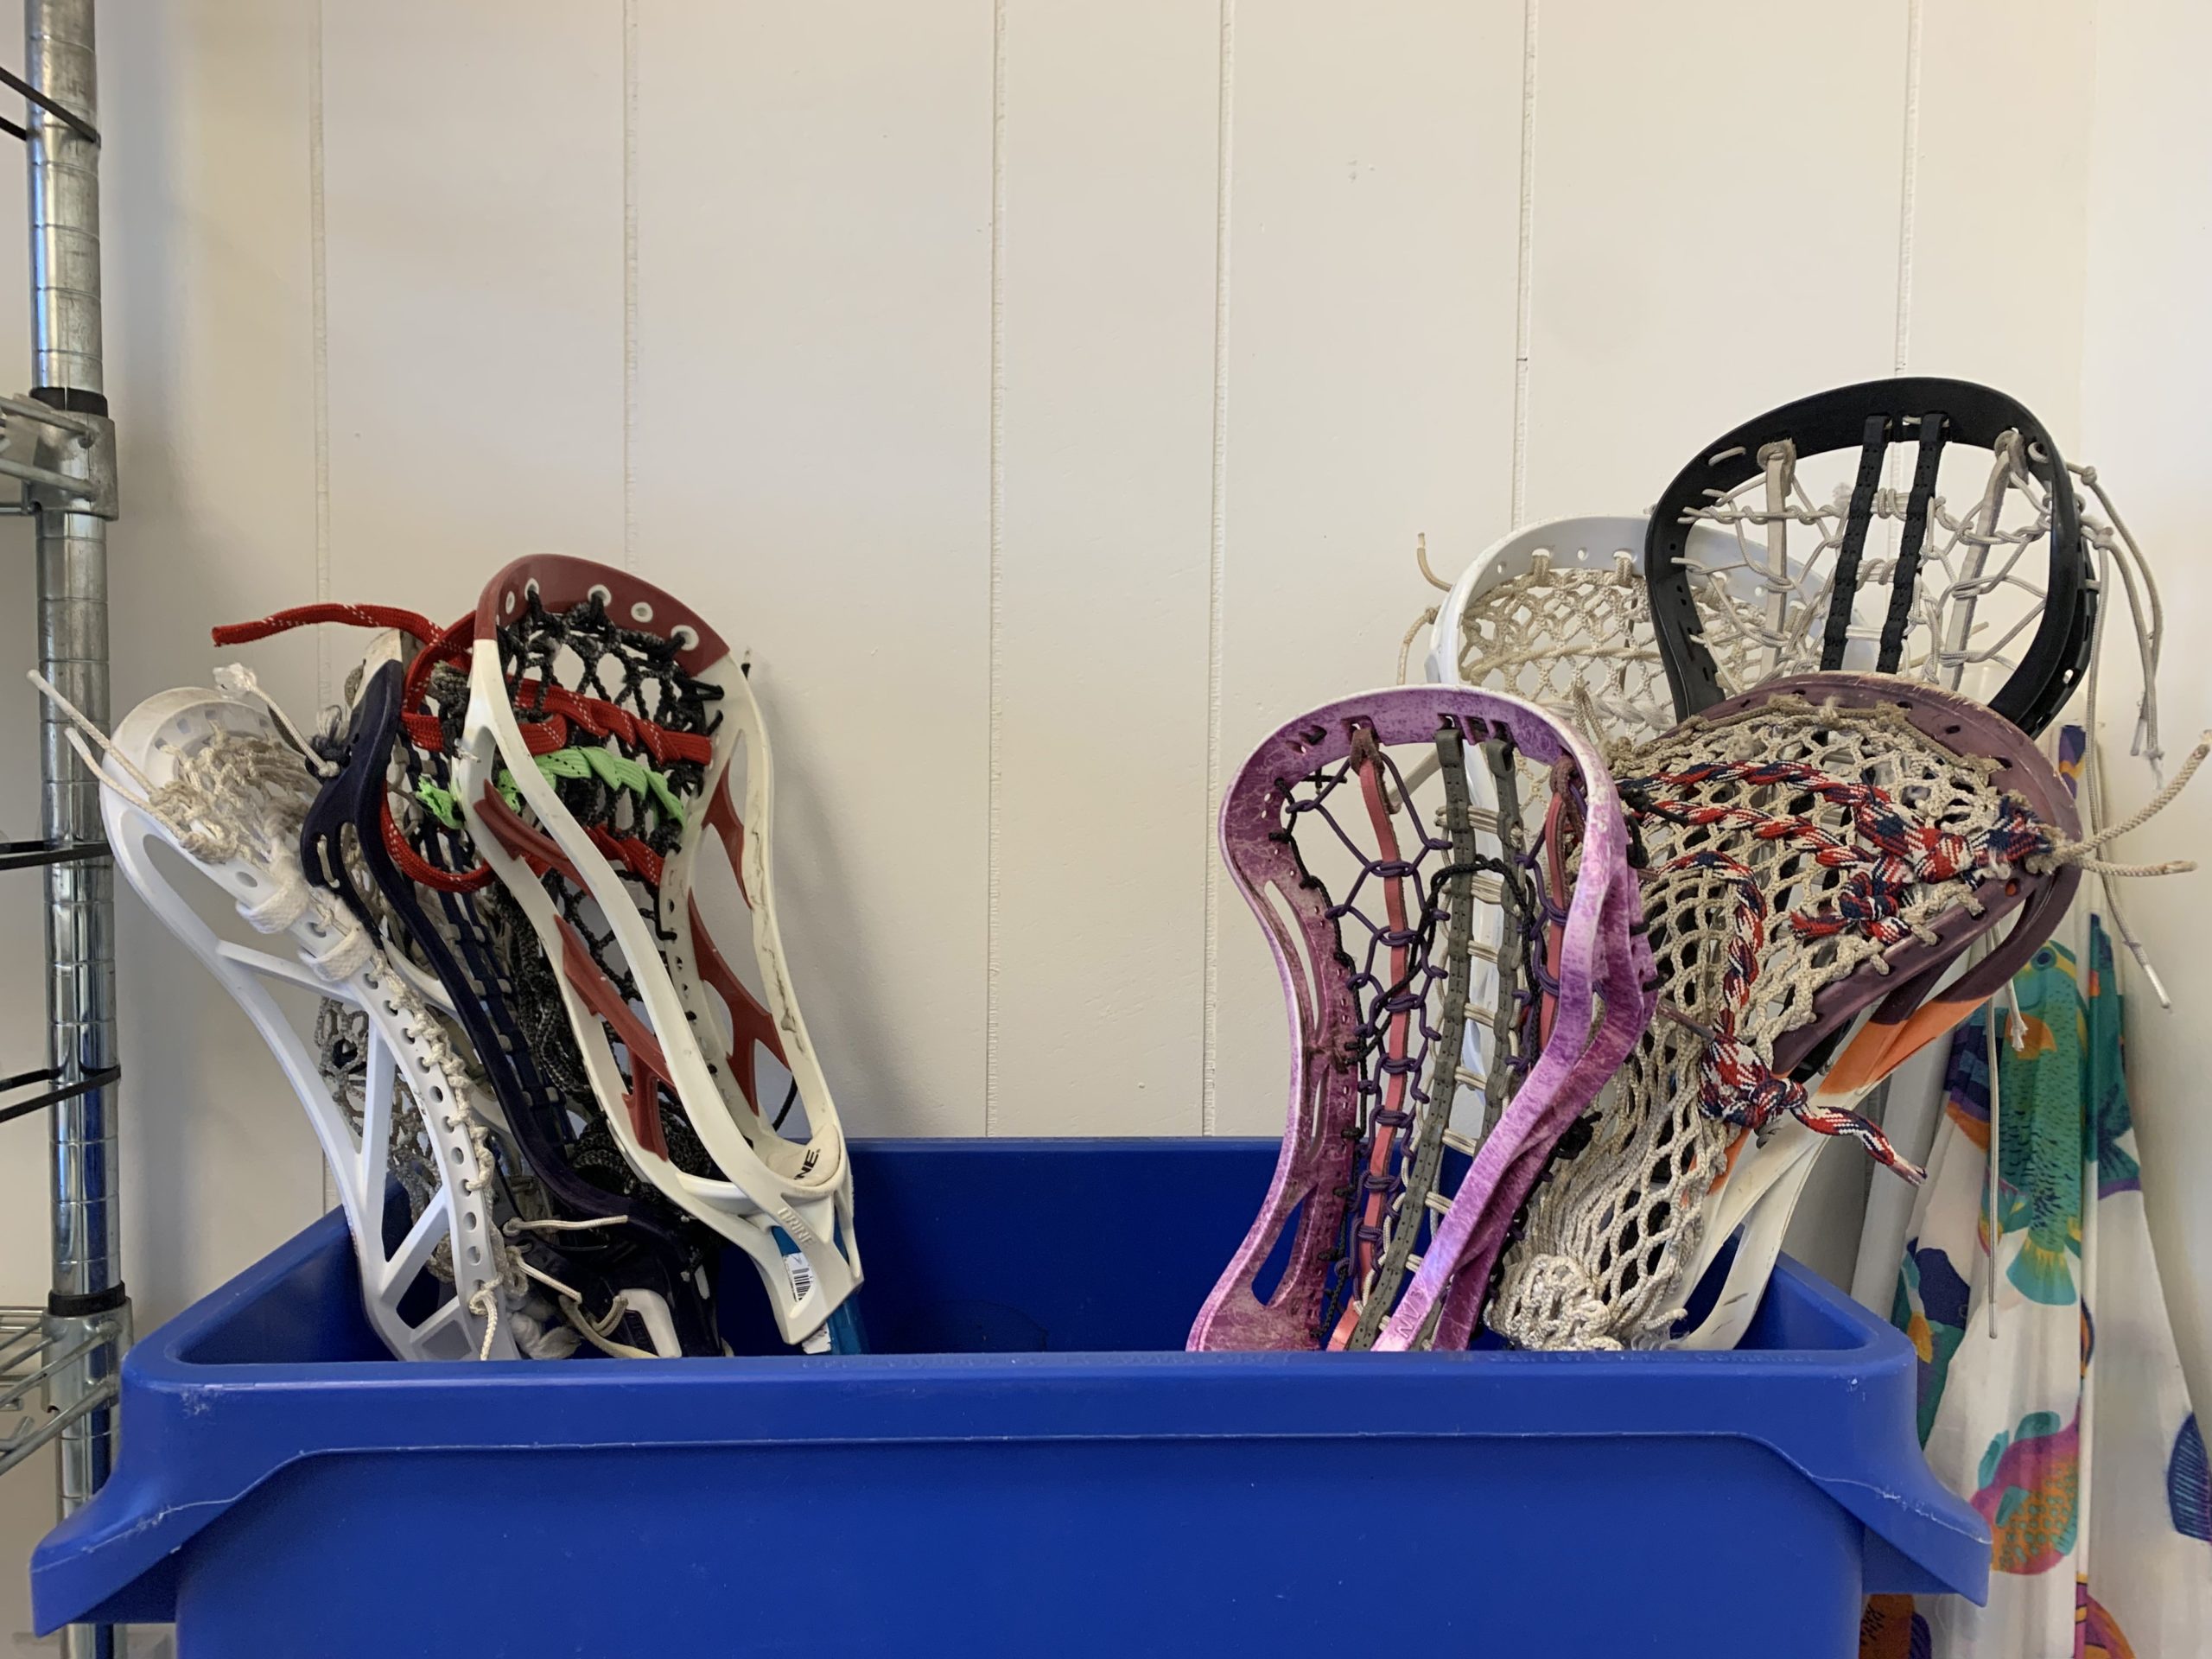 Example of sport equipment that will be available including lacrosse sticks